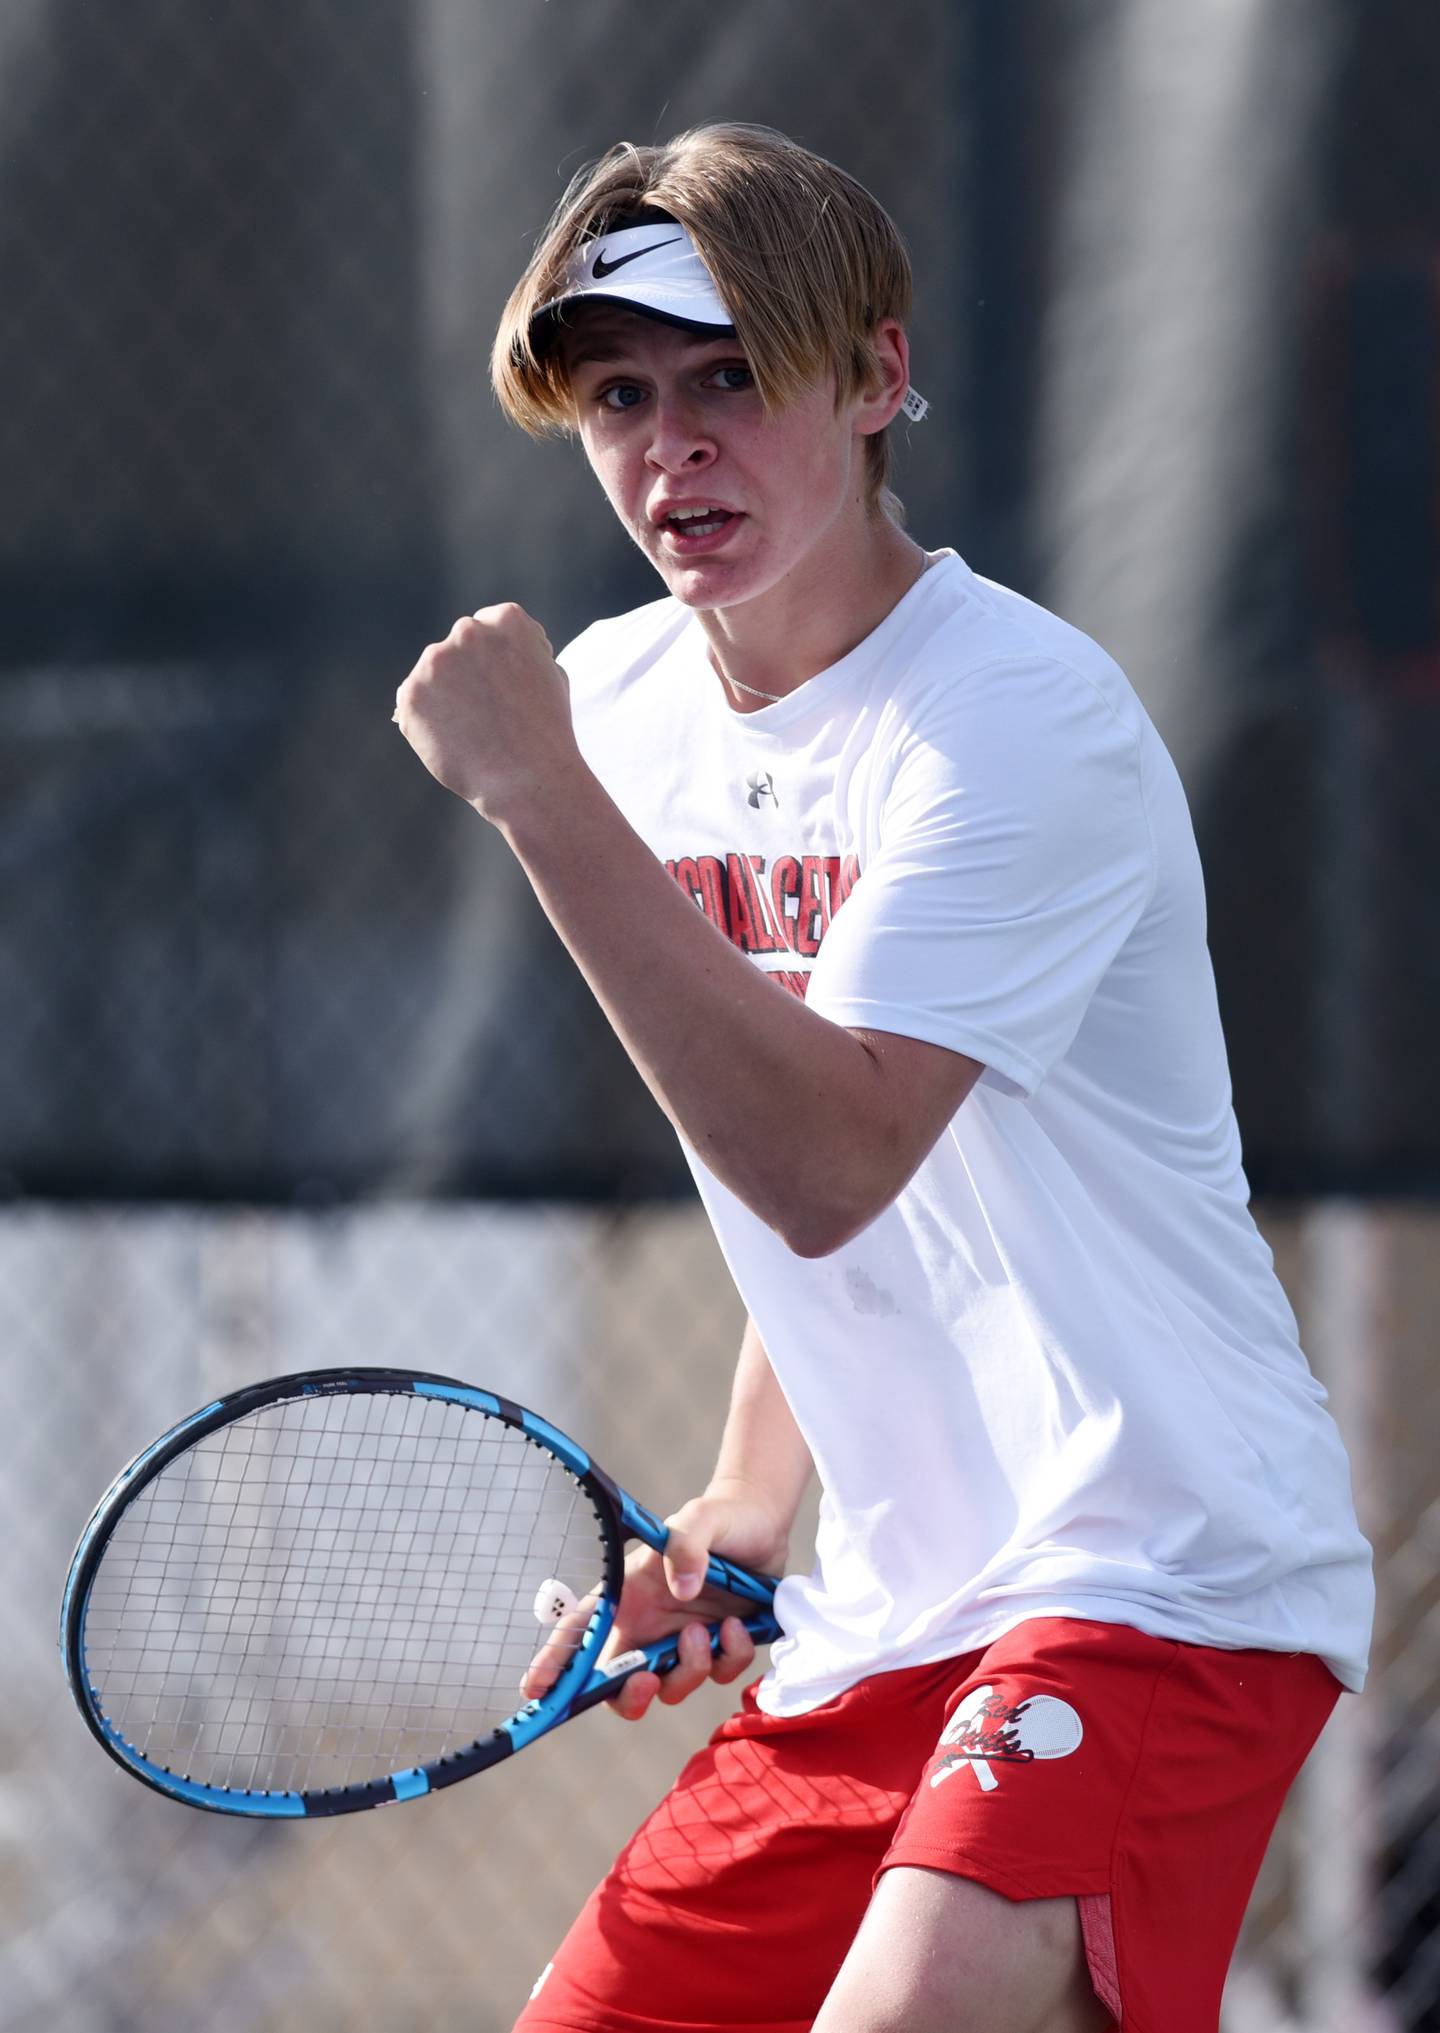 Hinsdale Central doubles player James Theriault celebrates a point during the Class 2A state tennis semifinals at Hersey High School in Arlington Heights Saturday.